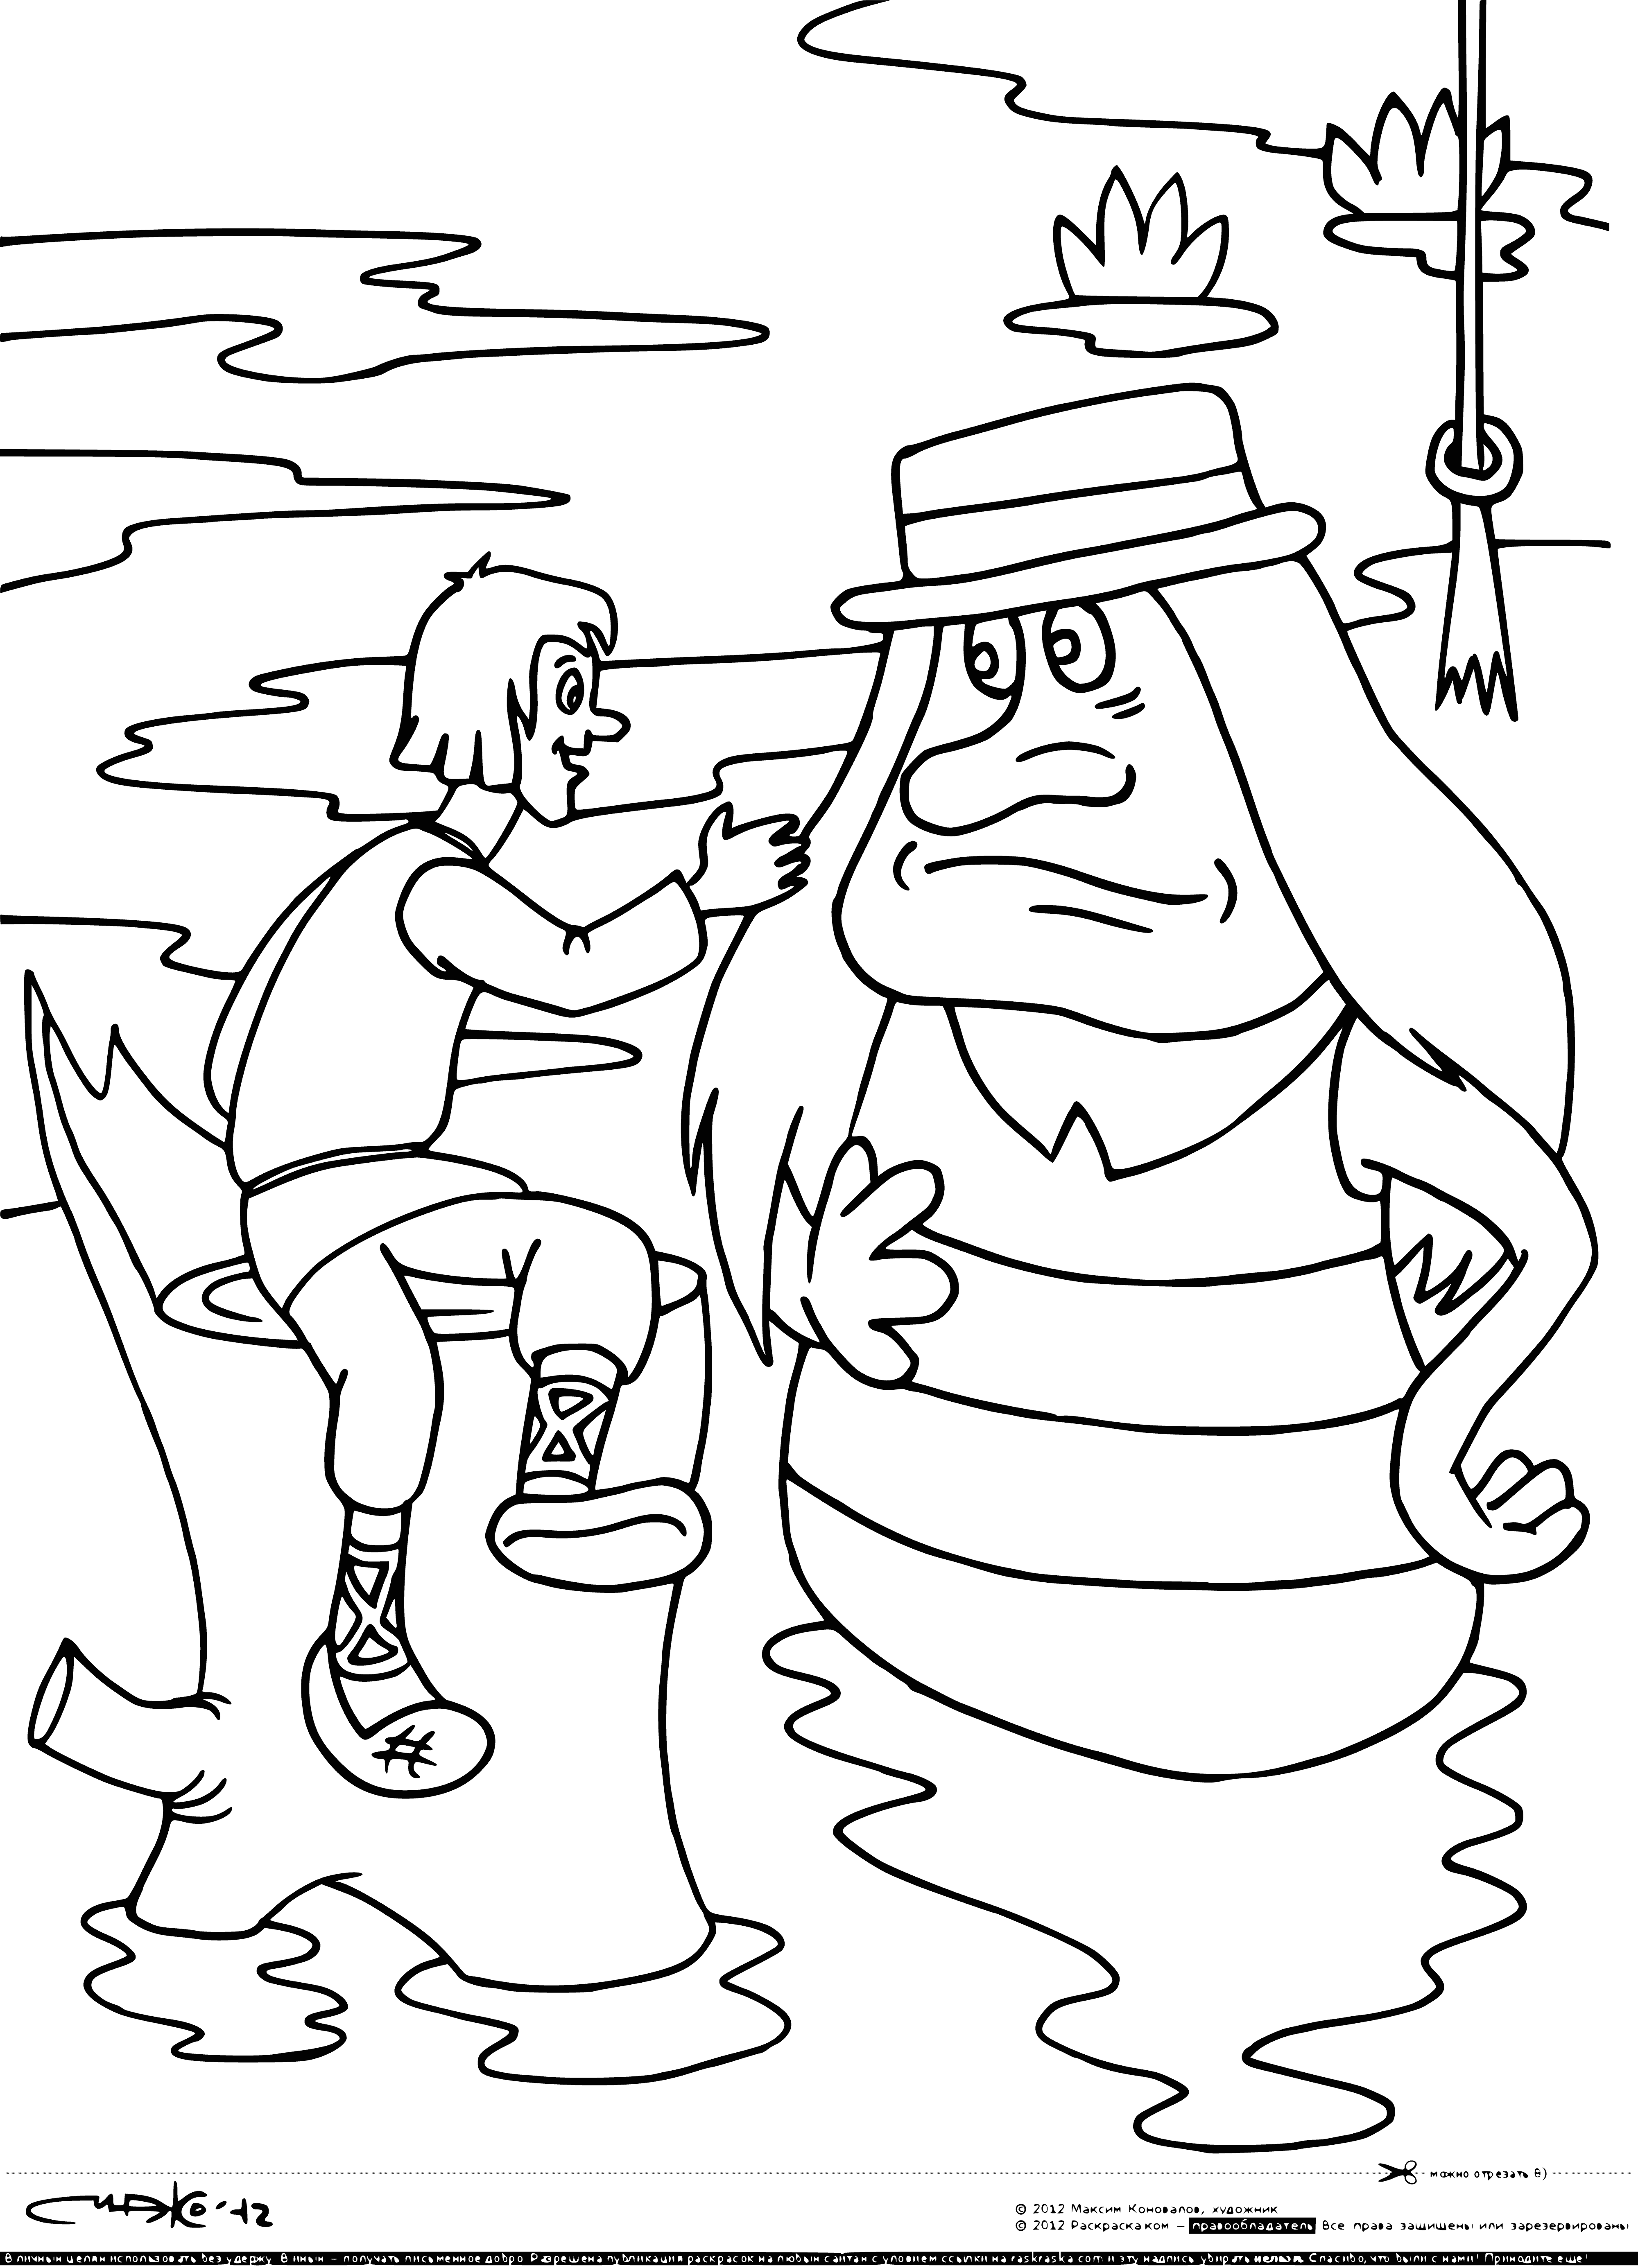 coloring page: Vanya and Vodyanoy, a flying ship w/large and small sails, w/people on the deck and in the rigging, soars over a body of water. #mythology